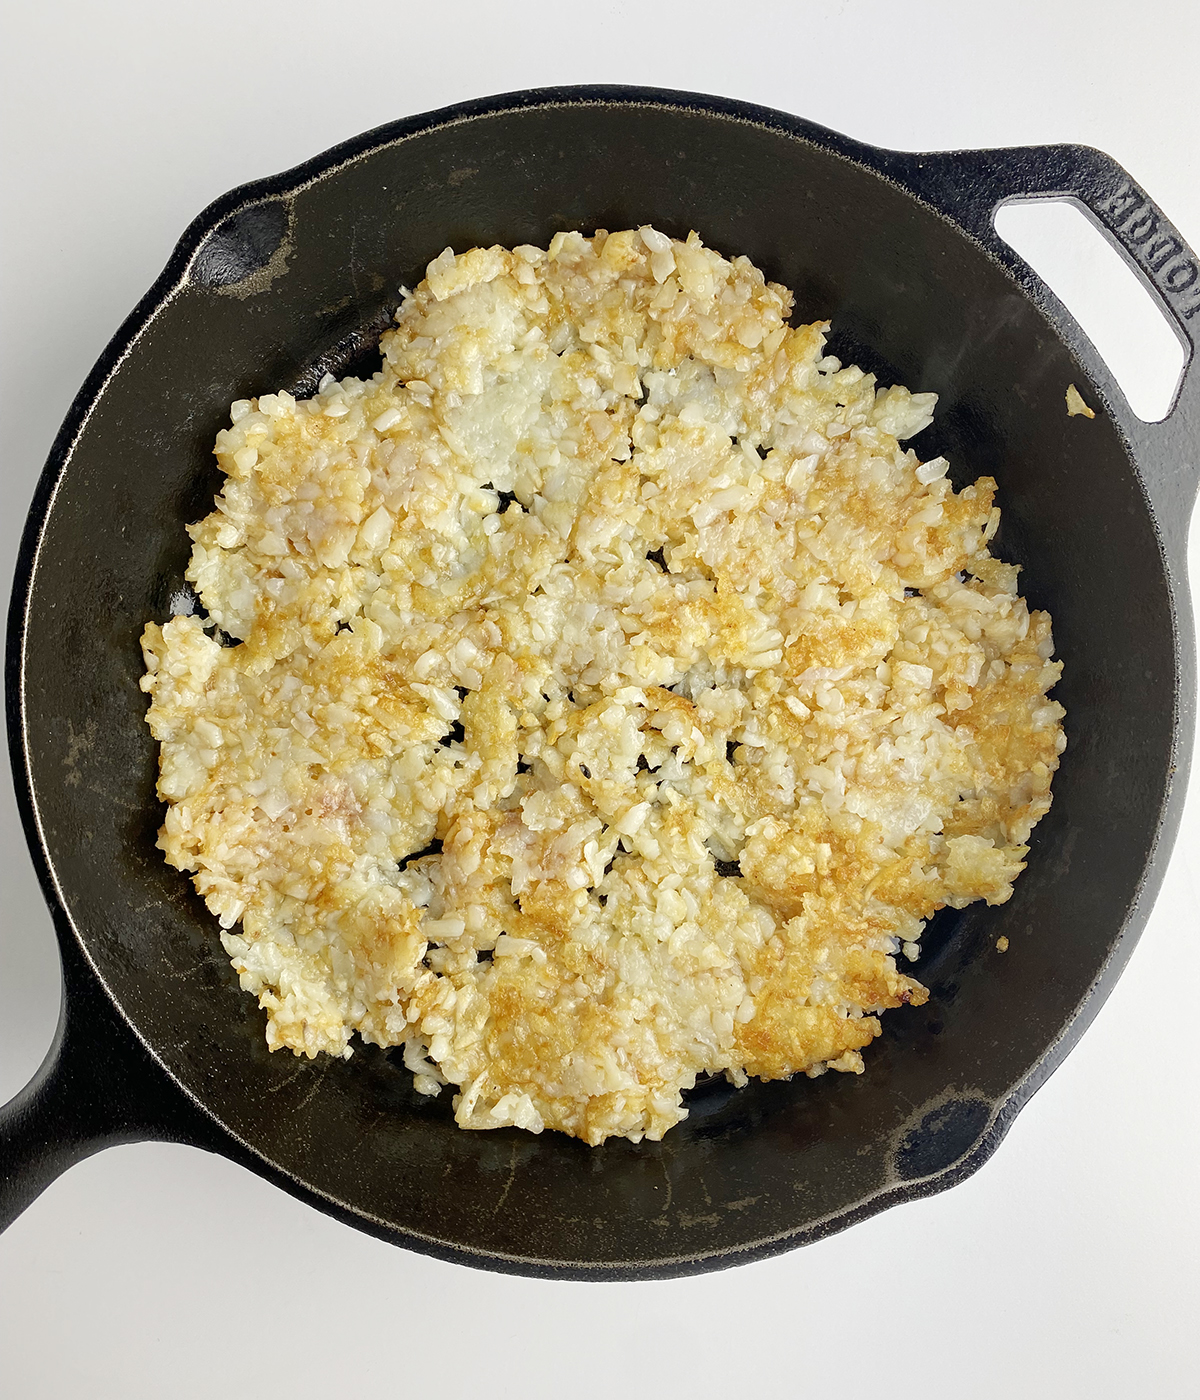 Browned Tater Tot crust in a skillet.